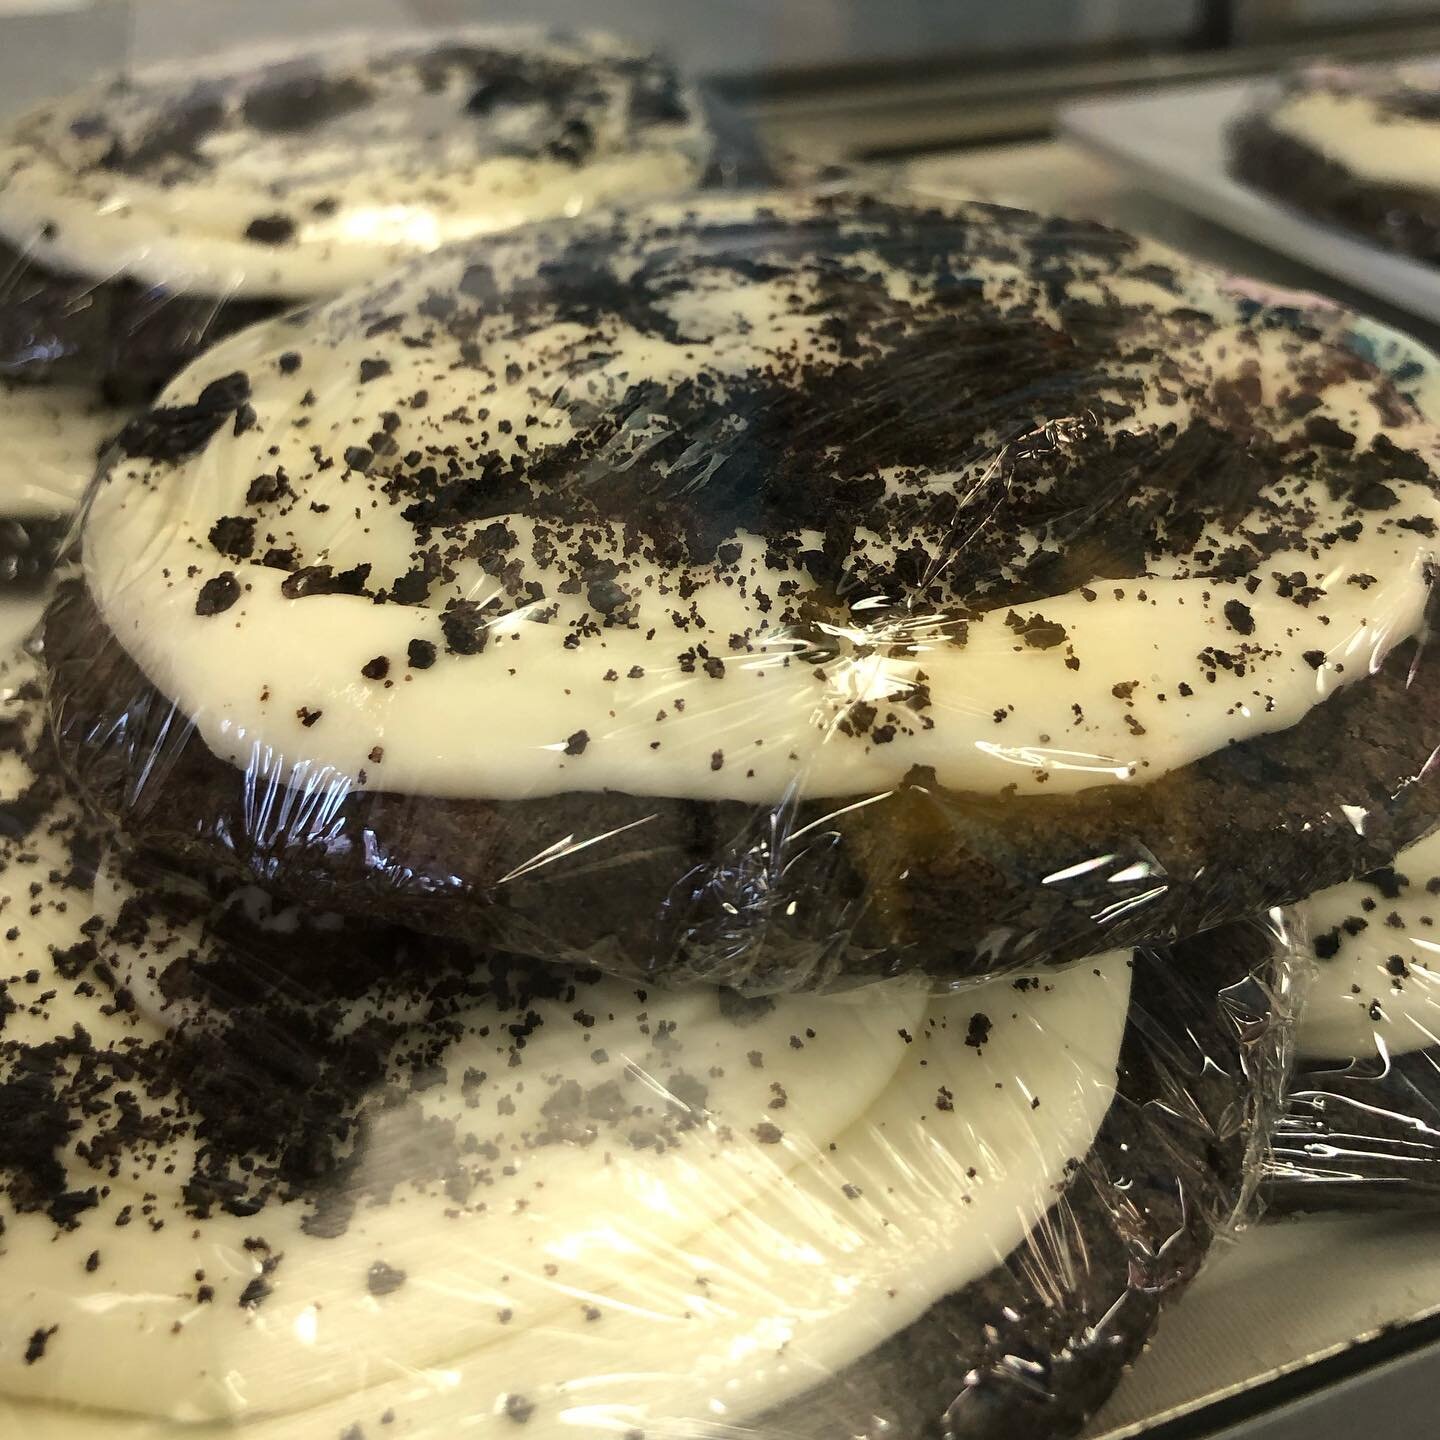 Yesterday was a &ldquo;Kitchen Takover&rdquo; day and Look at this COOKIE:) It&rsquo;s an Oreo Crumble cookie with a cream cheese icing that Zoie made! #treatyourself #kitchentakeover #giantcookie